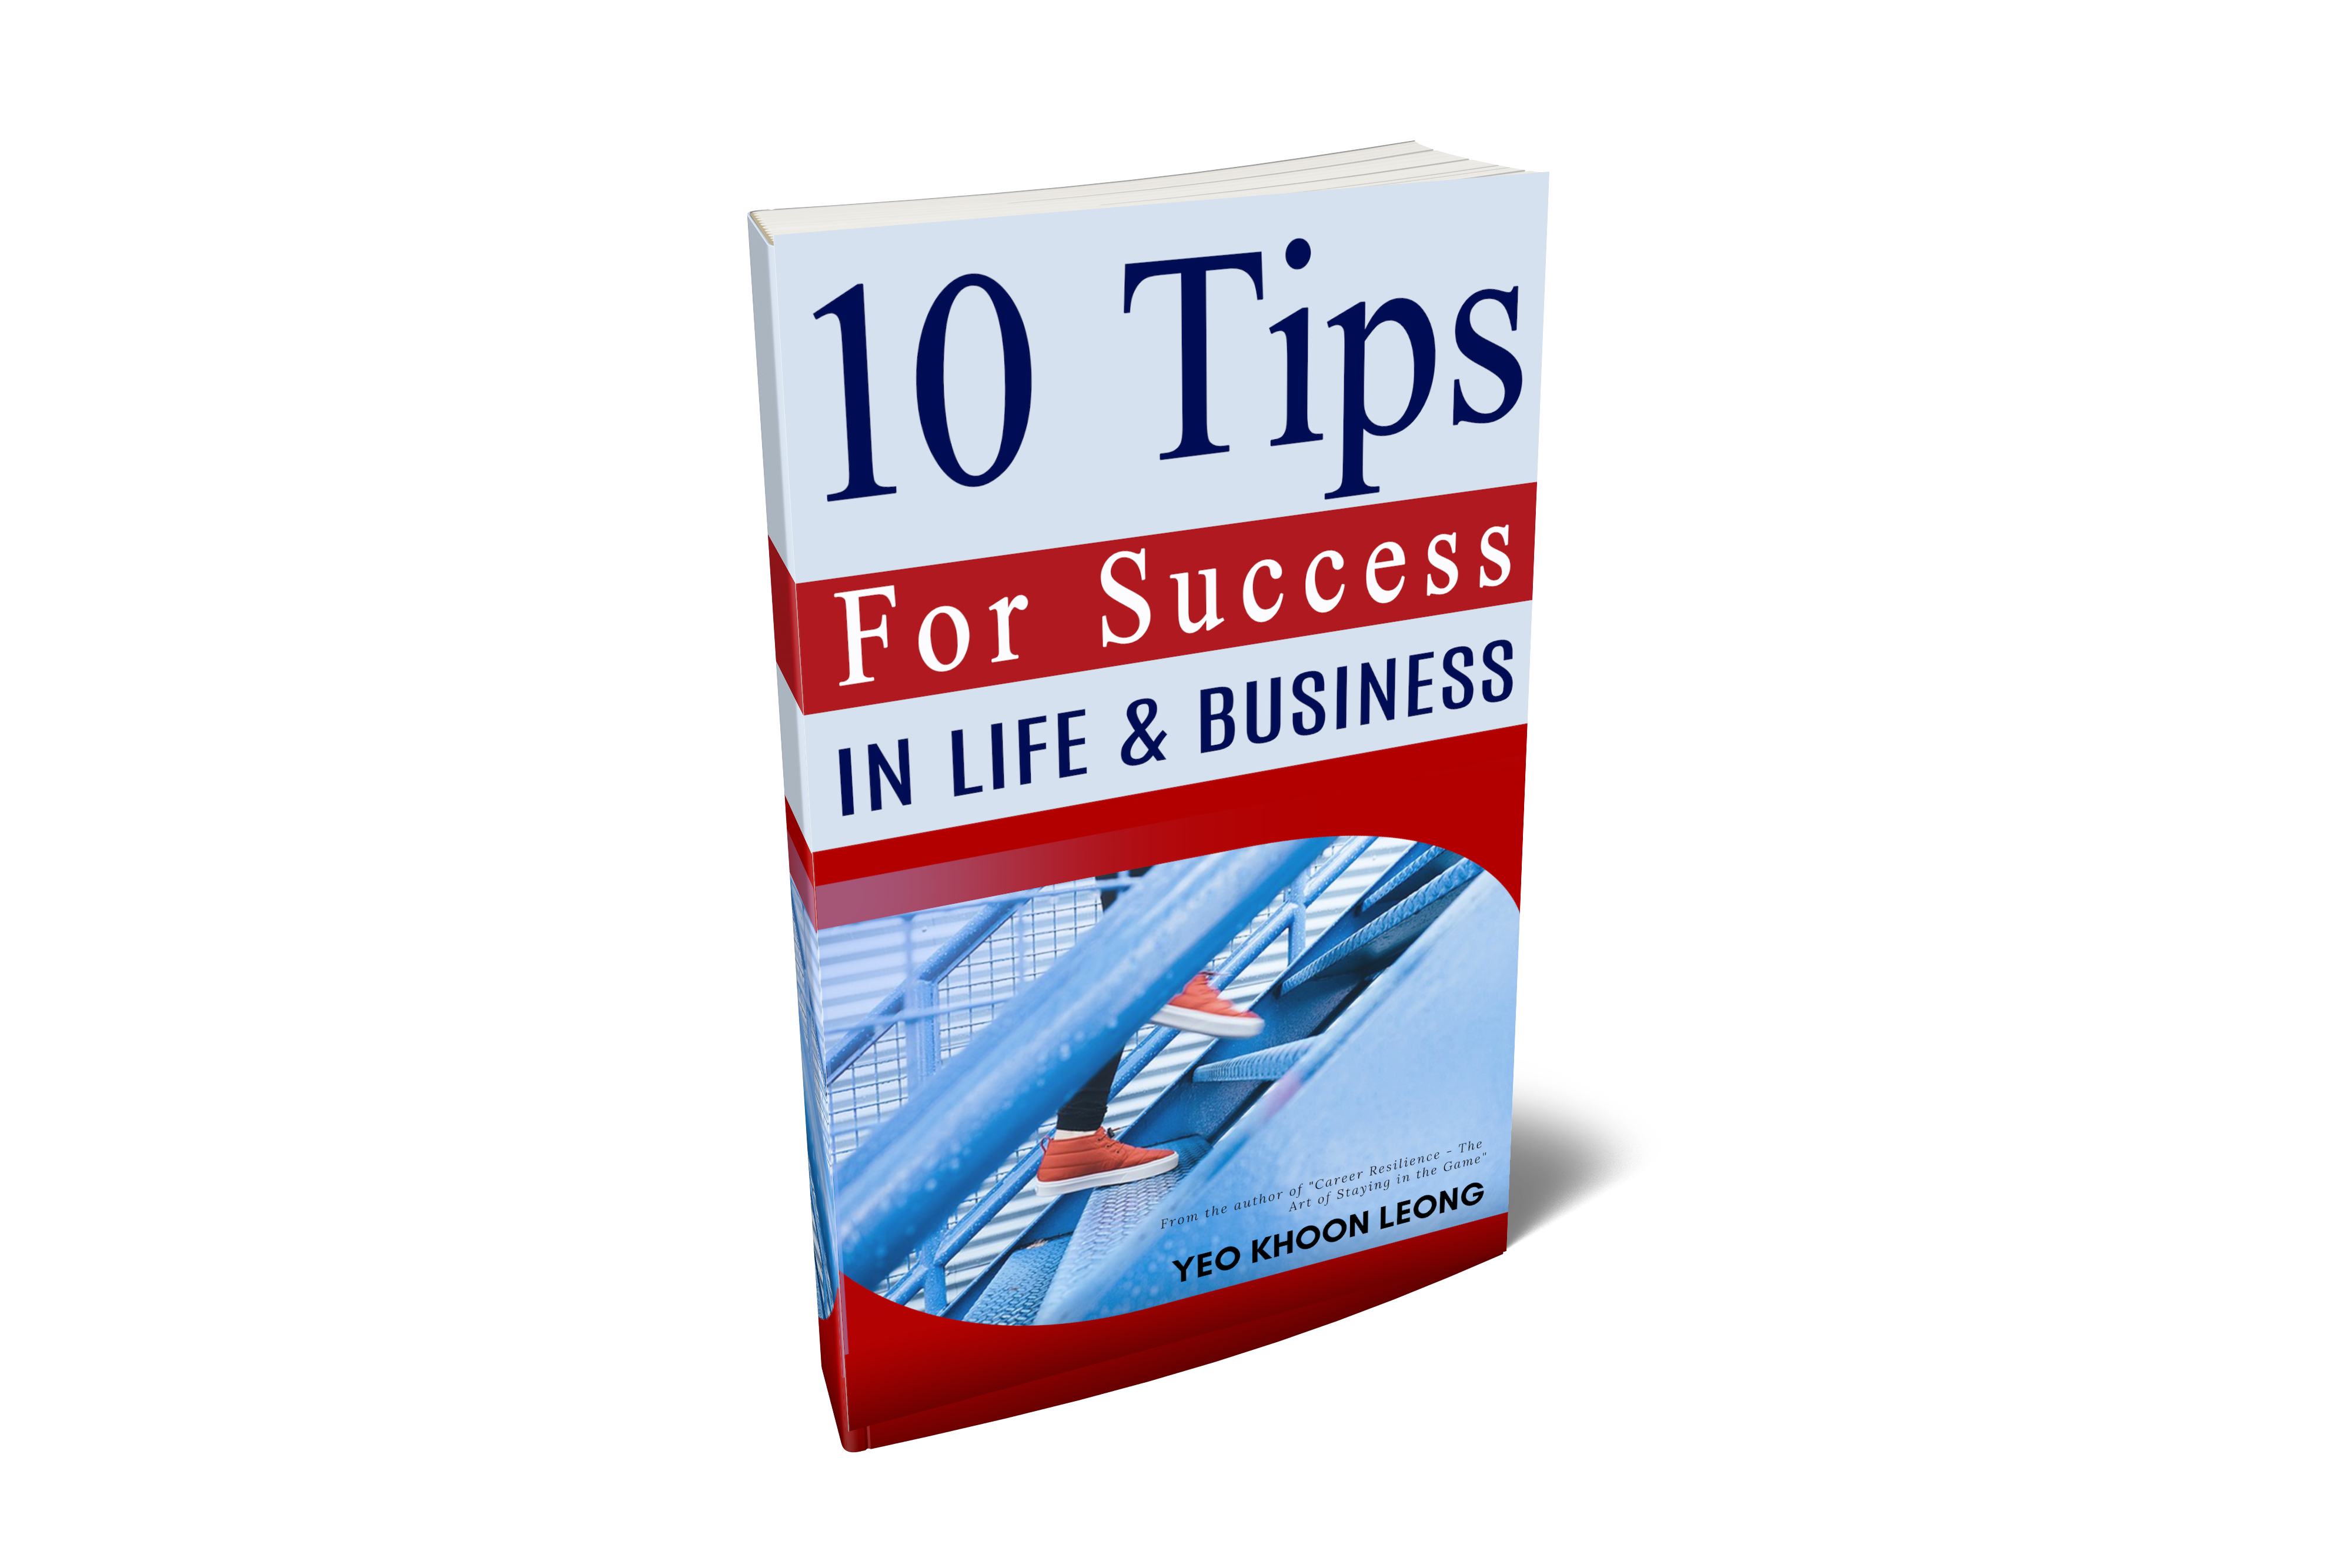 10 Tips for Success